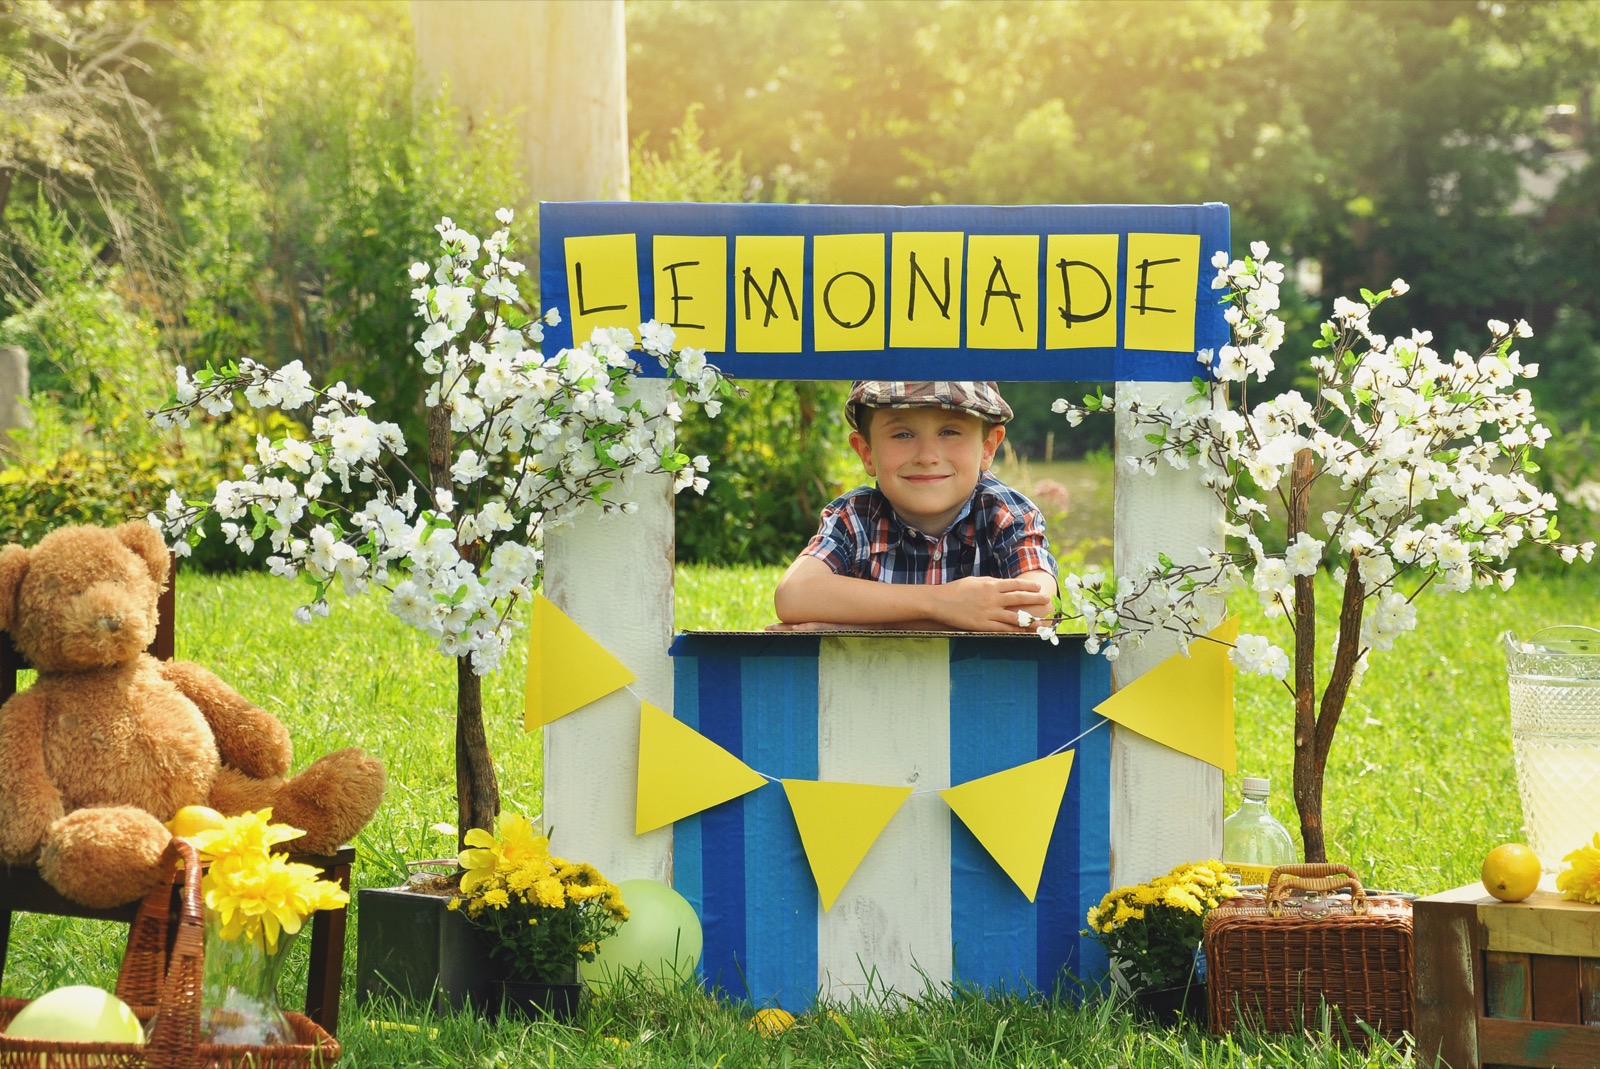 How Close Are You to Being a ‘Karen’? Lemonade Stand